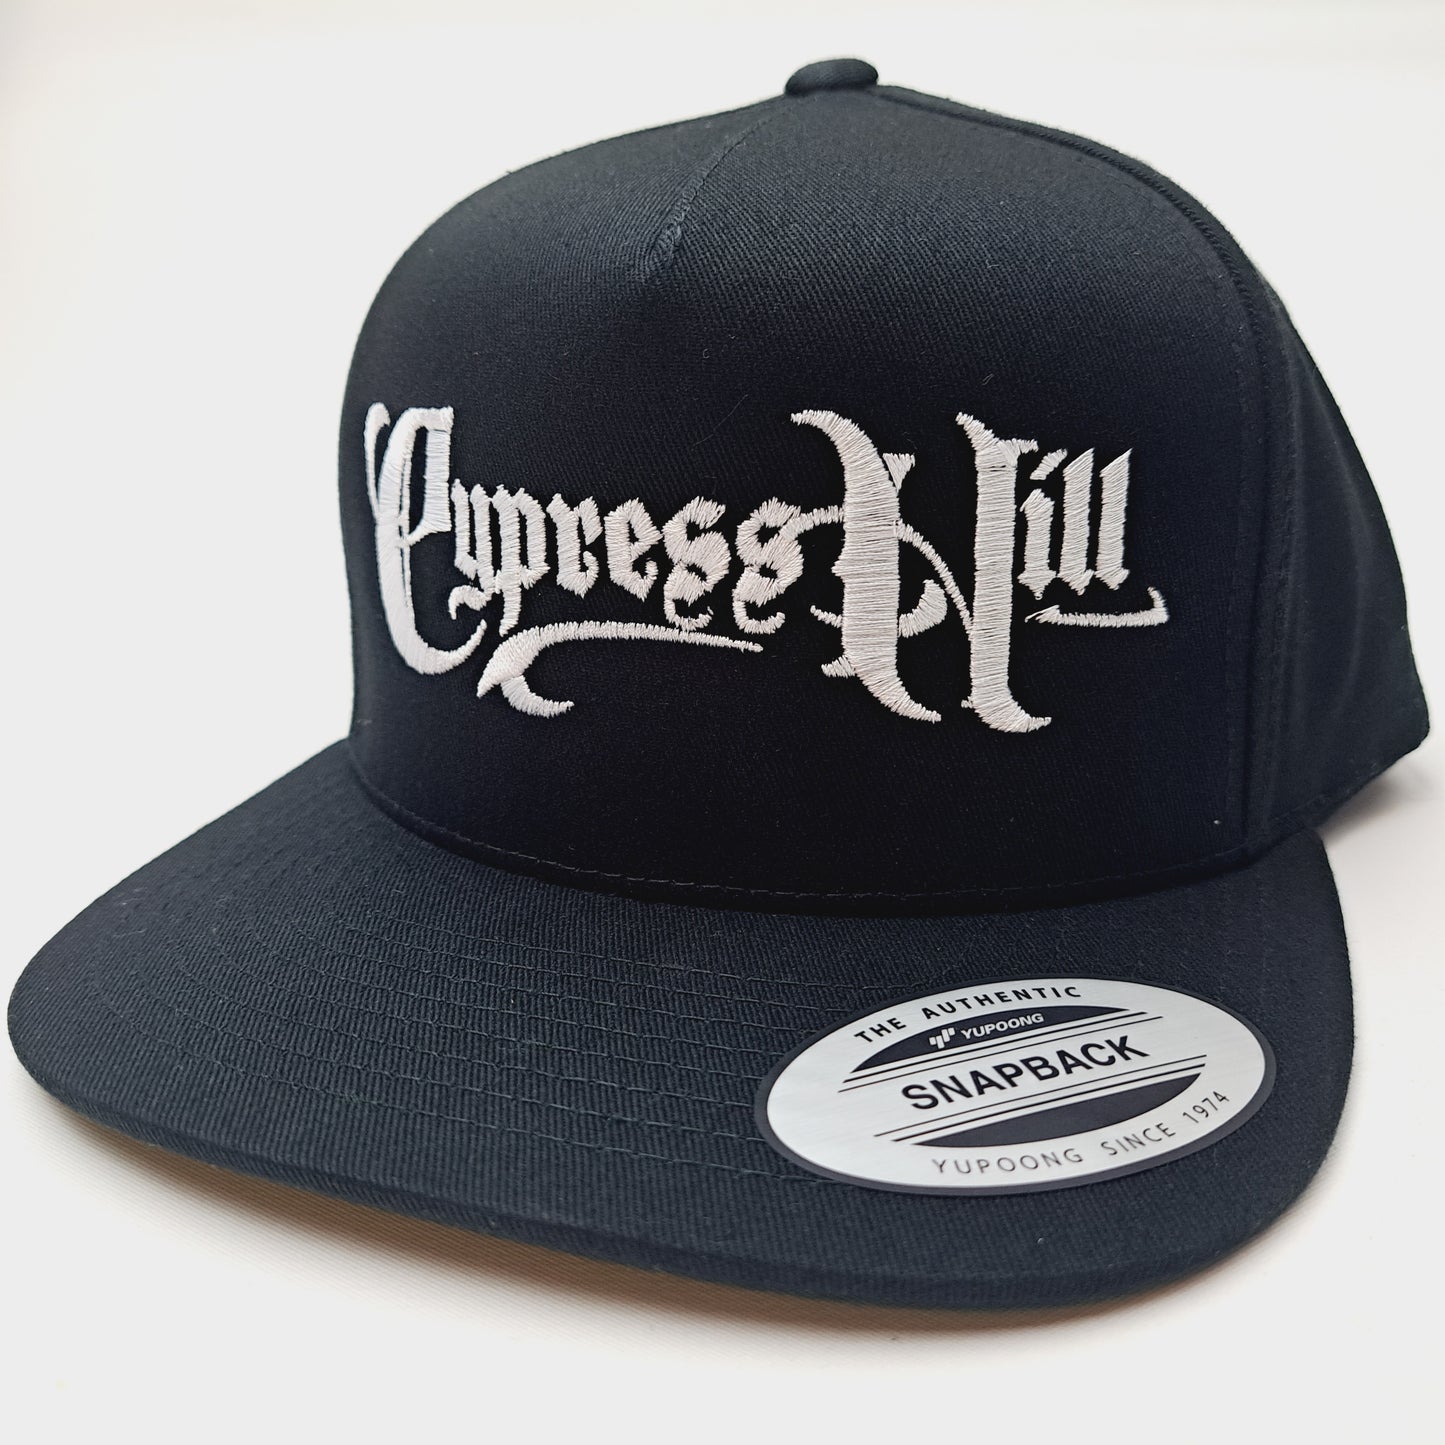 Cypress Hill Embroidered Snapback Cap Hat Black